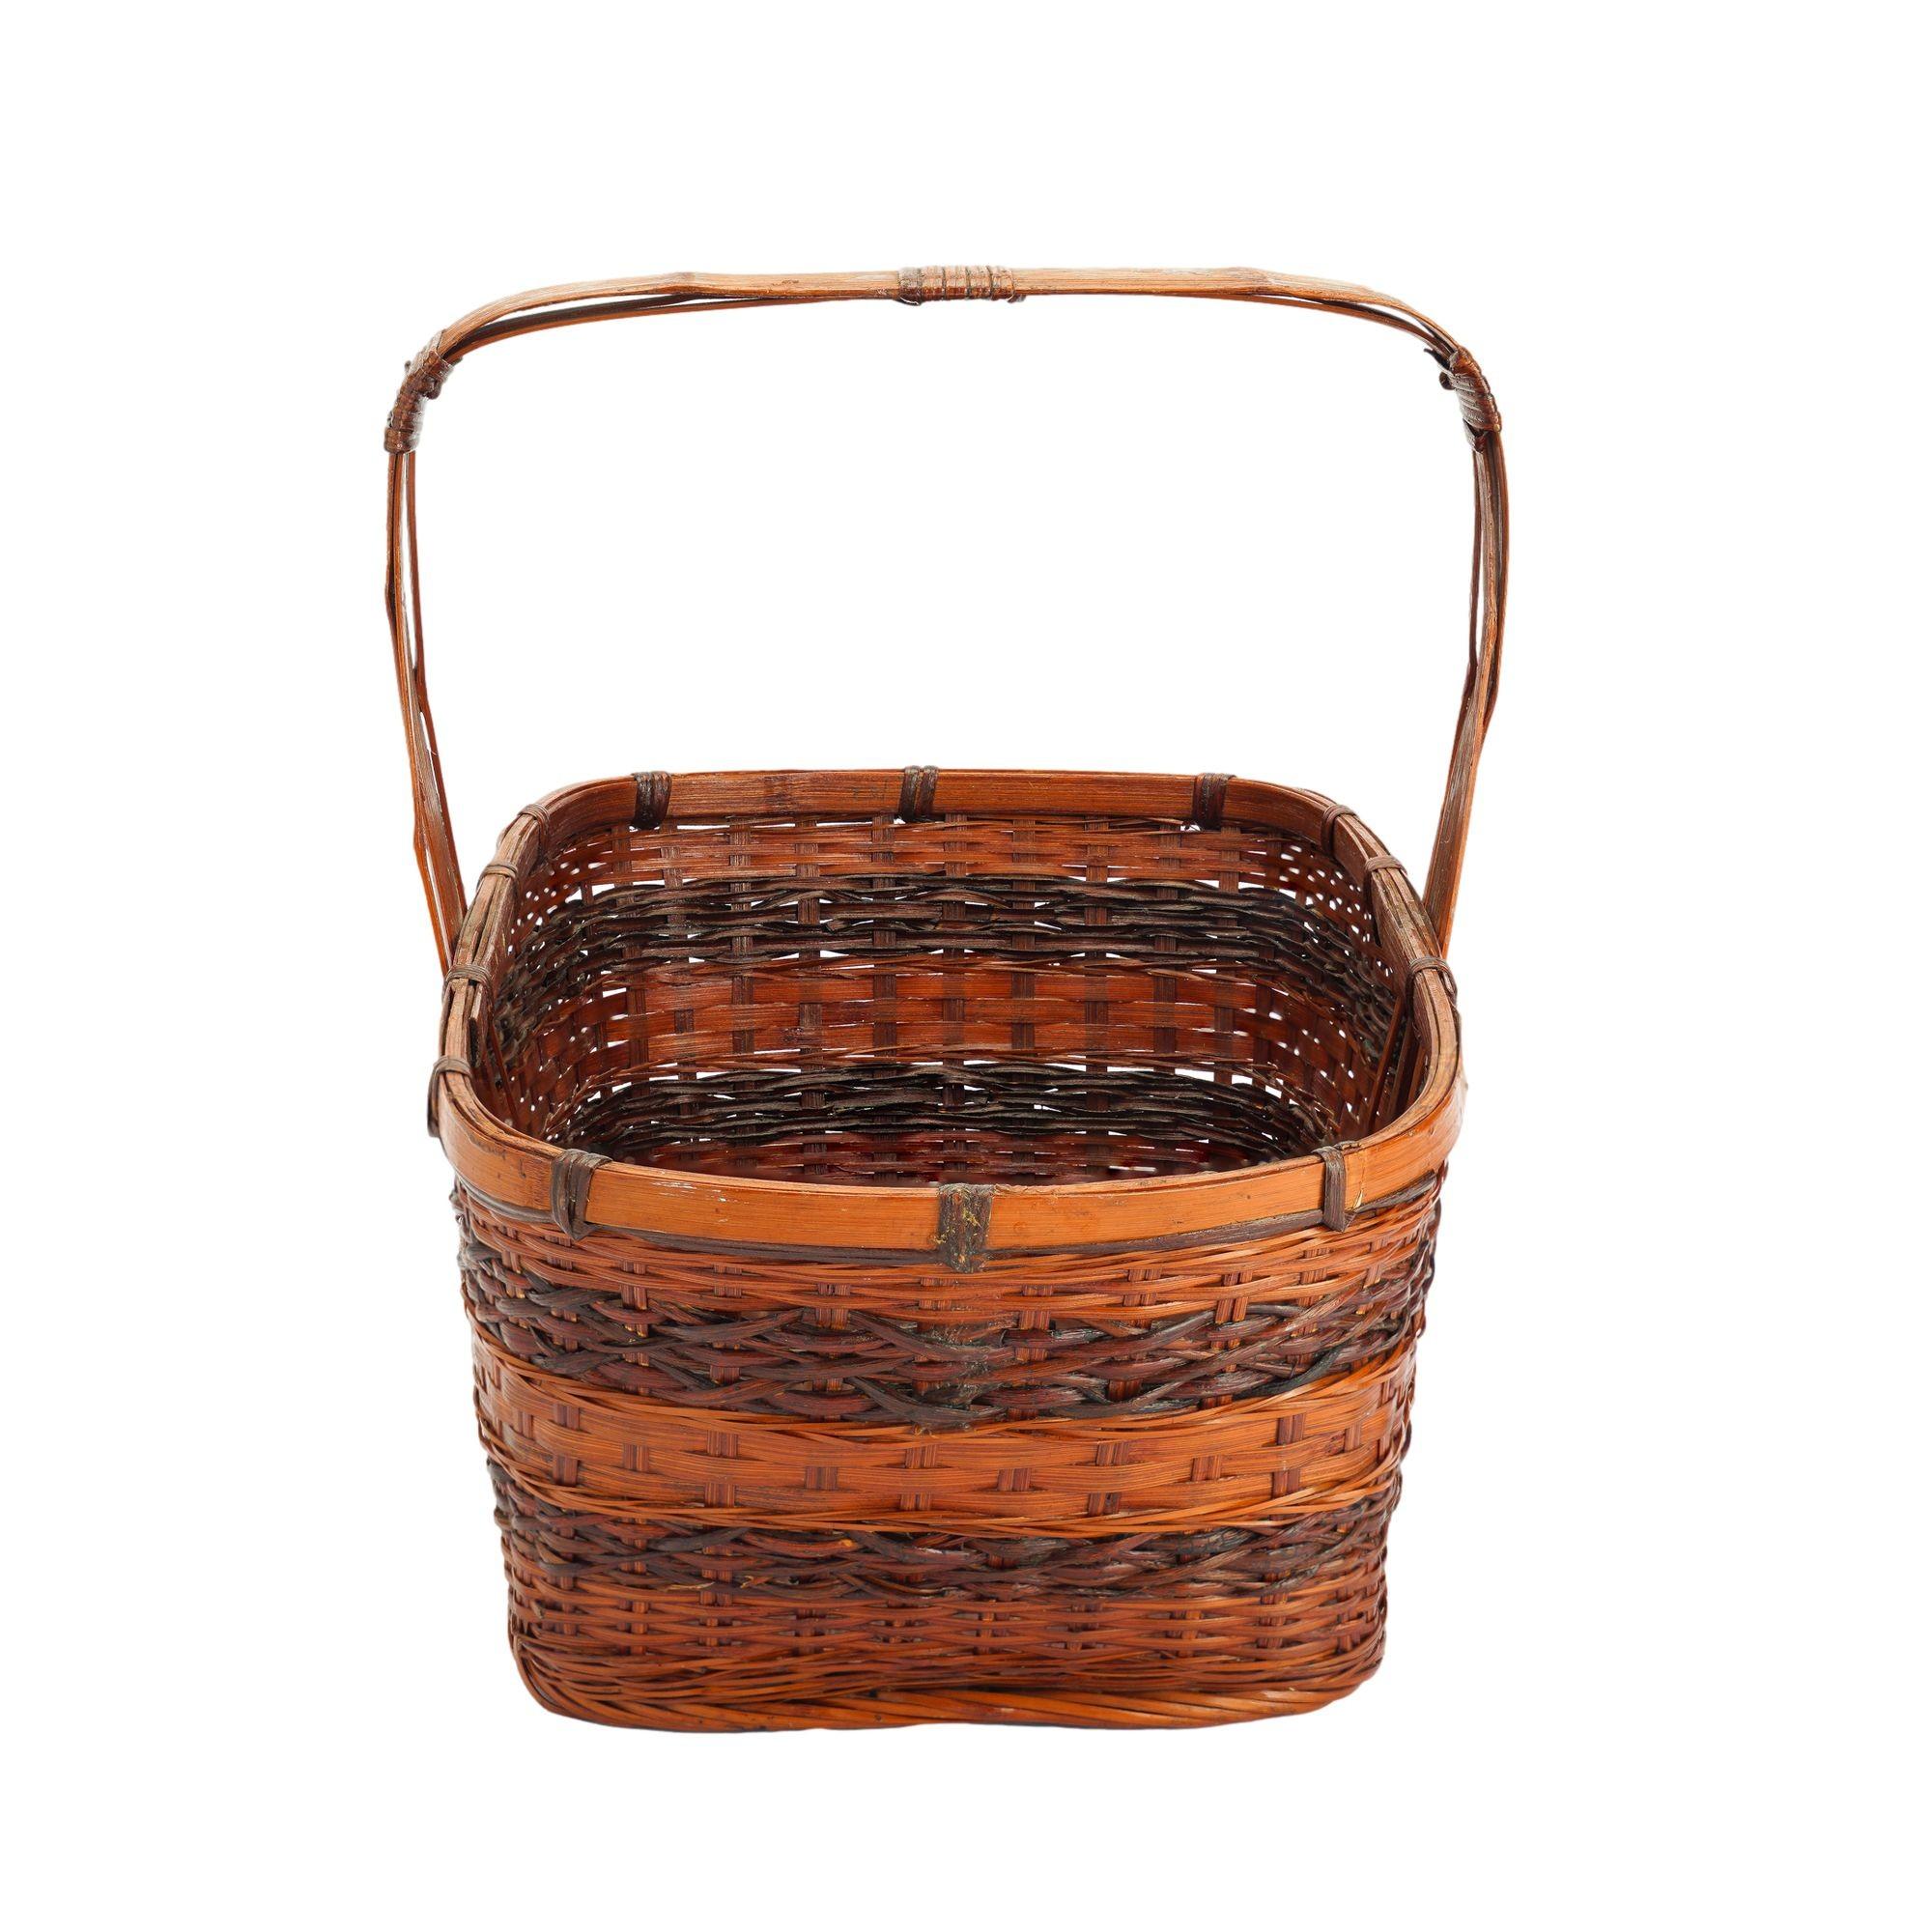 Vintage Japanese open top woven basket. The basket features a broad bent bamboo handle which is reinforced by angled bamboo stays lashed to the handle at both the bend in the handle and in the center of the handle's flat apex. The rim consists of